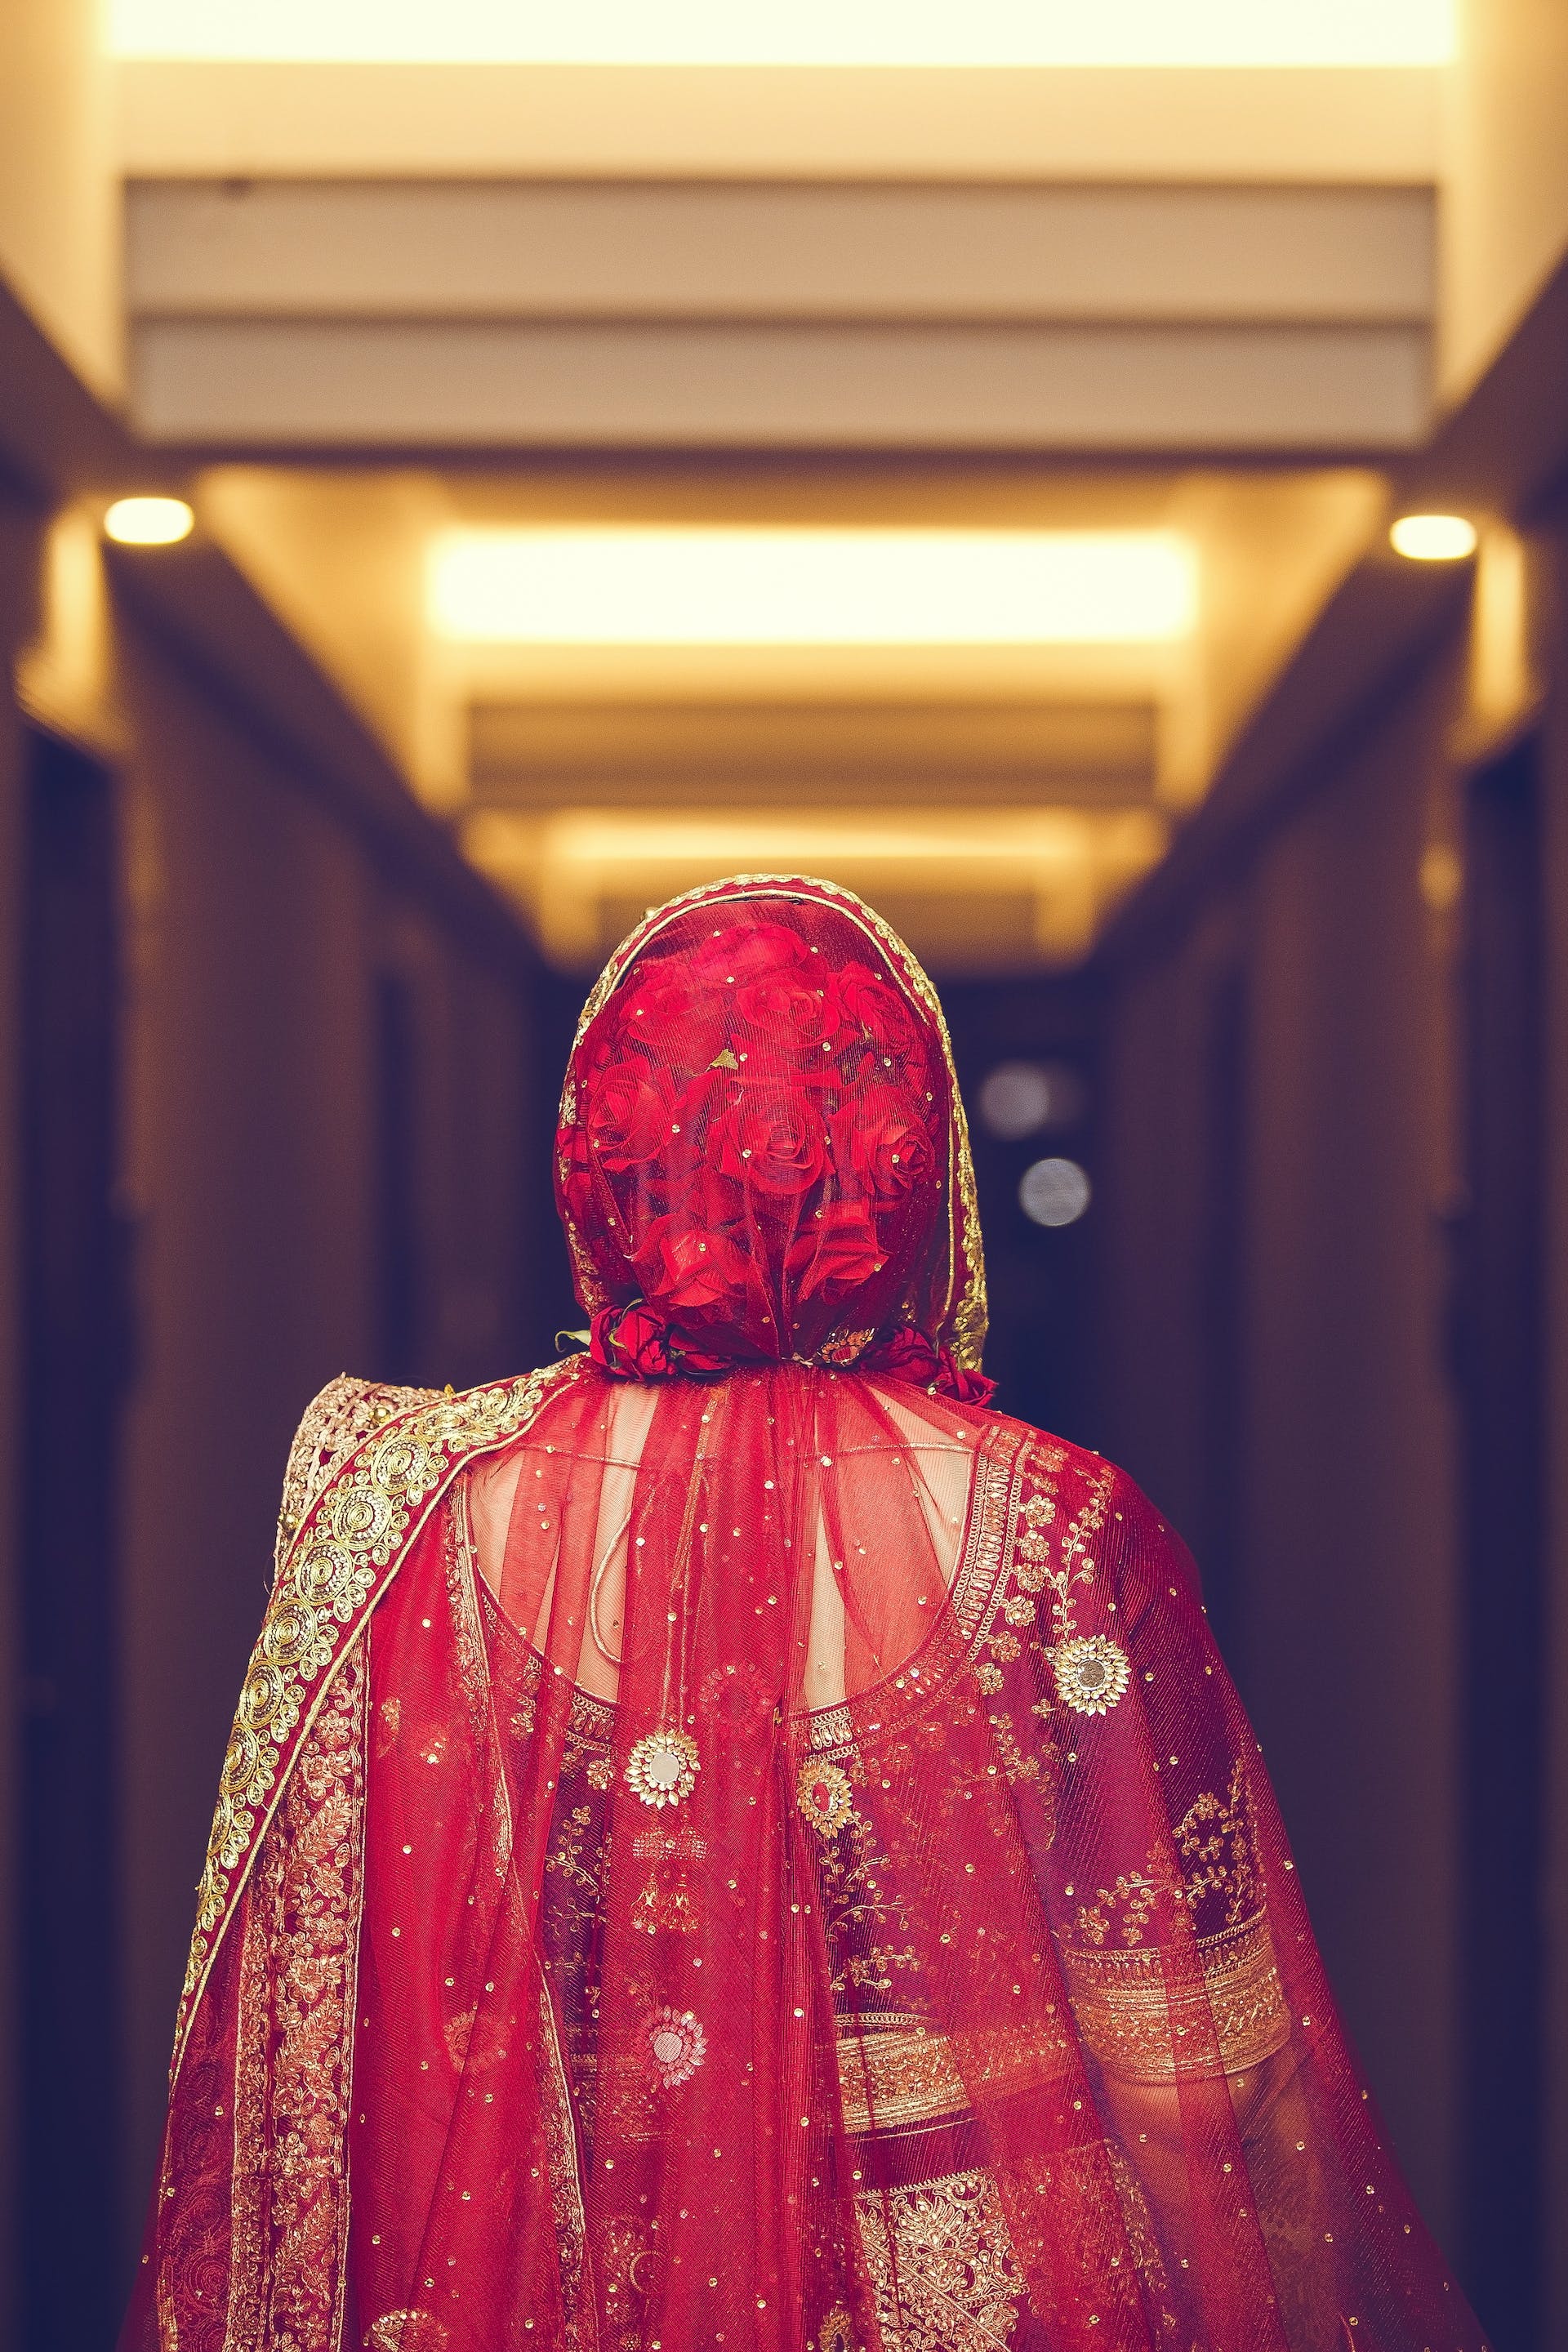 An bride in a red traditional dress | Source: Pexels